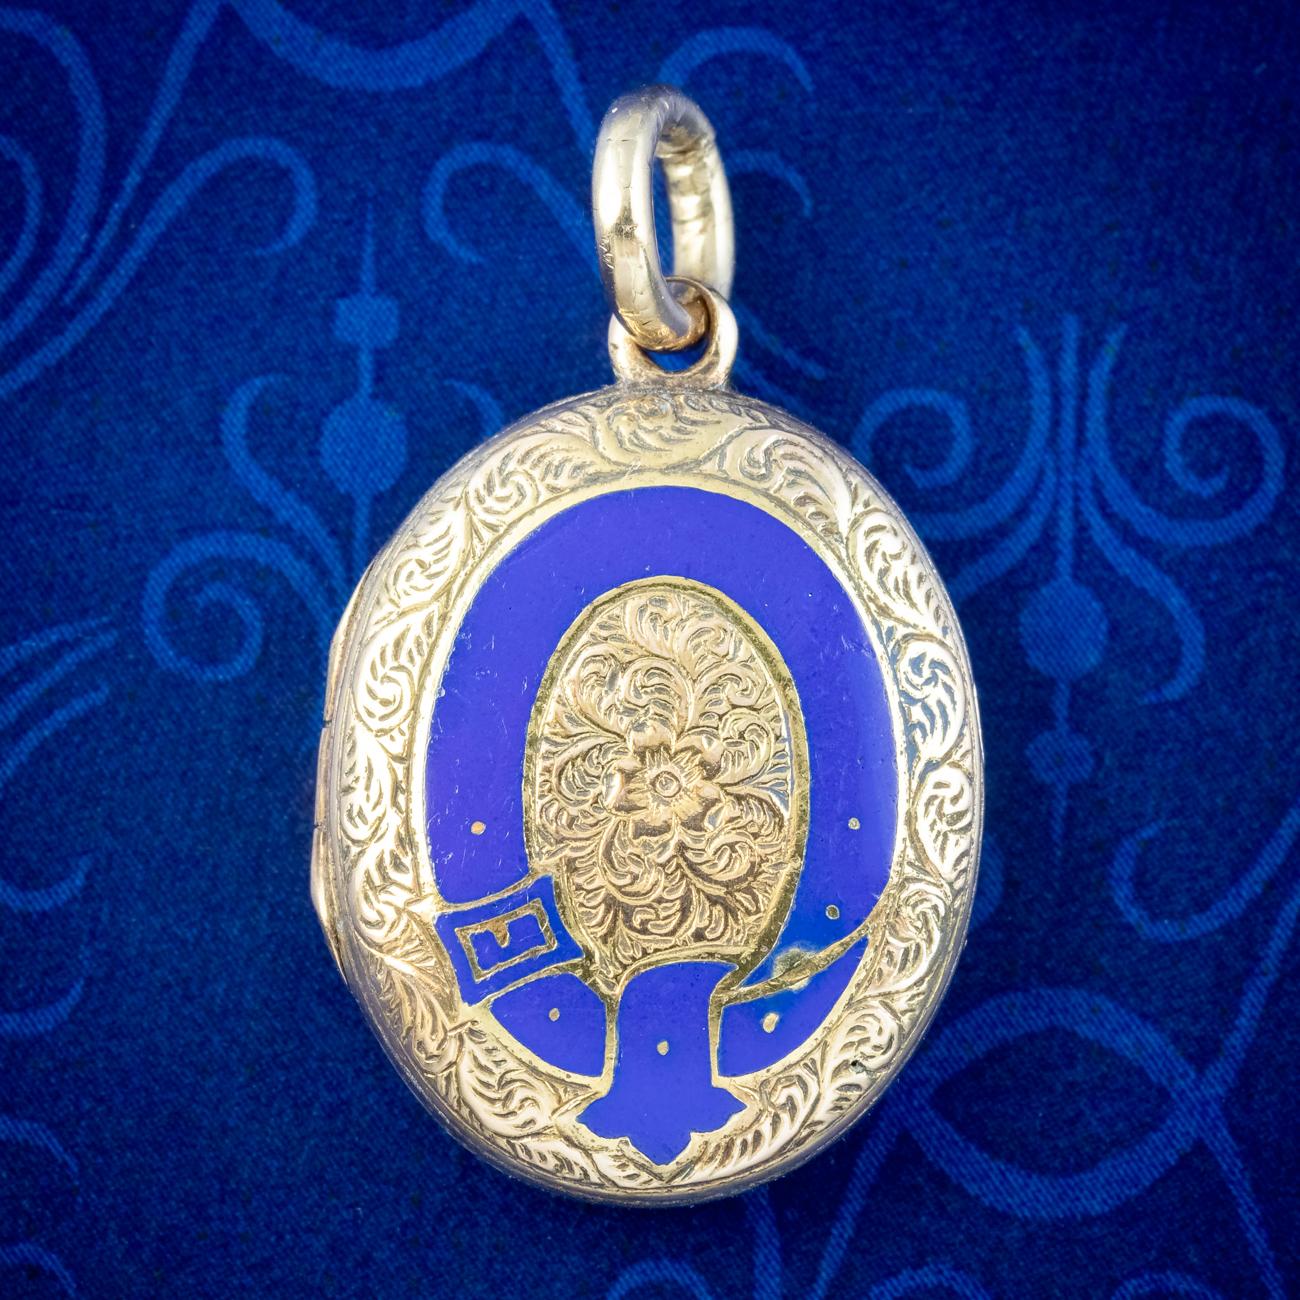 A petite antique Victorian Mourning locket fashioned in 9ct gold with scrolling, foliate artistry chased across both sides and a circular belt and buckle on the front highlighted in royal blue enamel with a forget me not in the centre, both